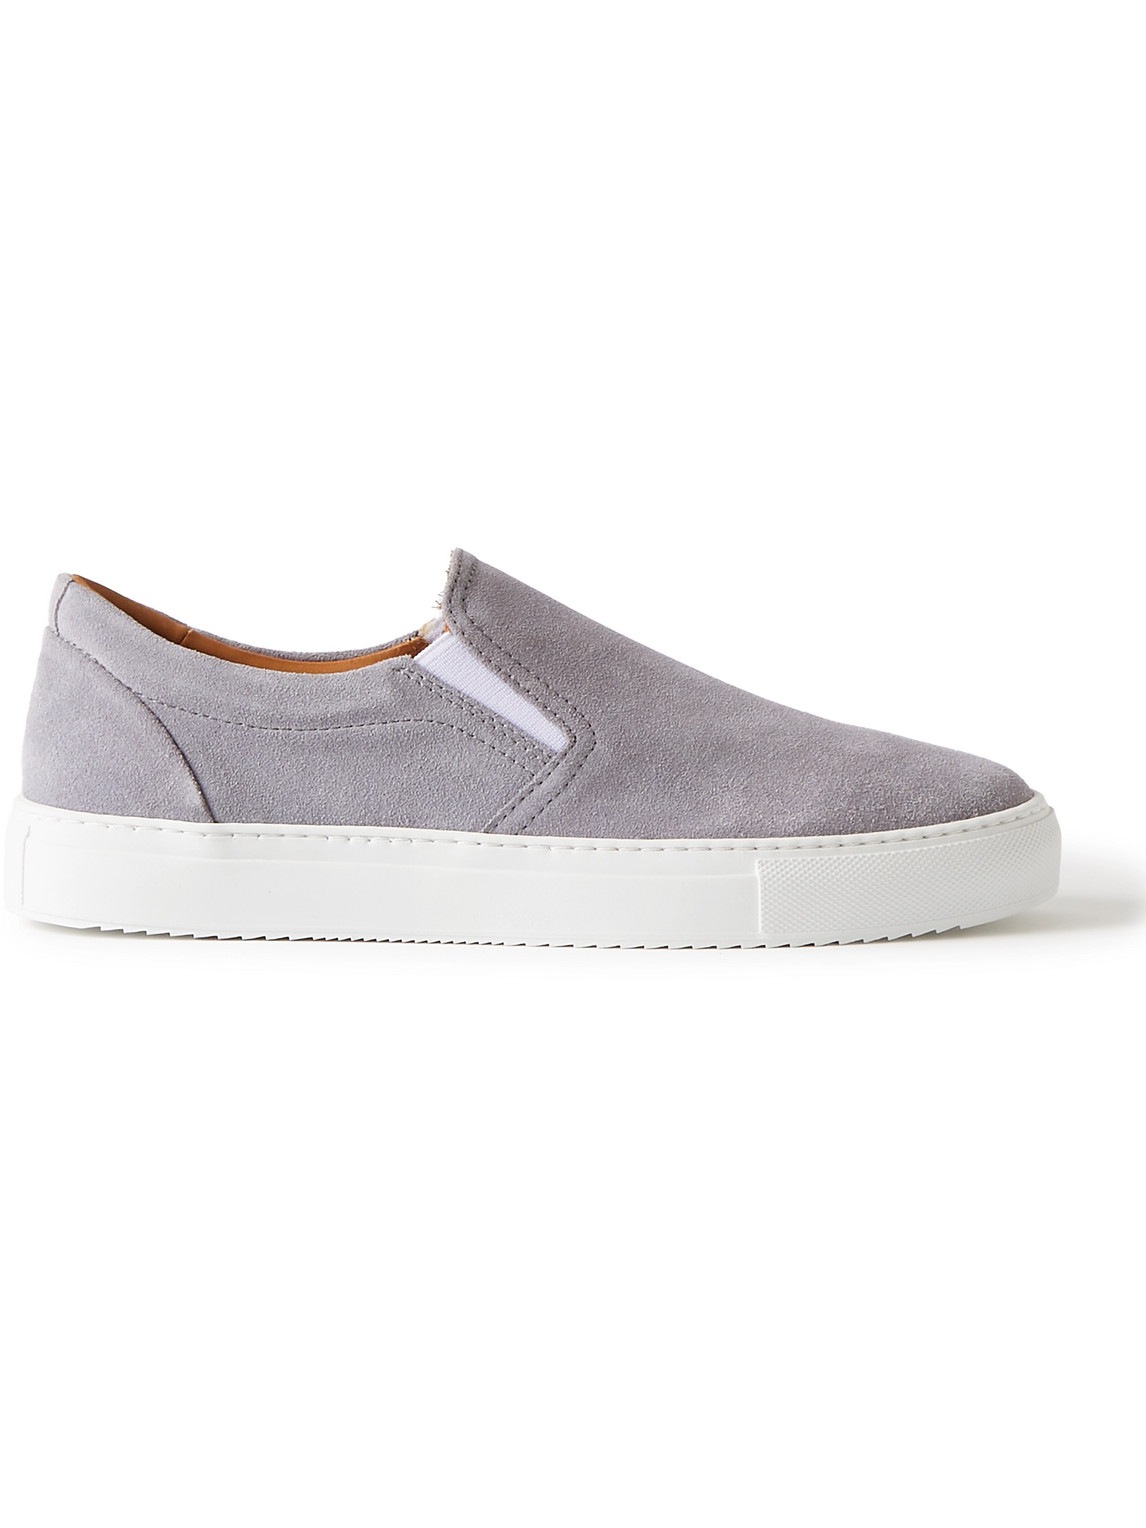 Mr P Regenerated Suede By Evolo® Slip-on Sneakers In Gray